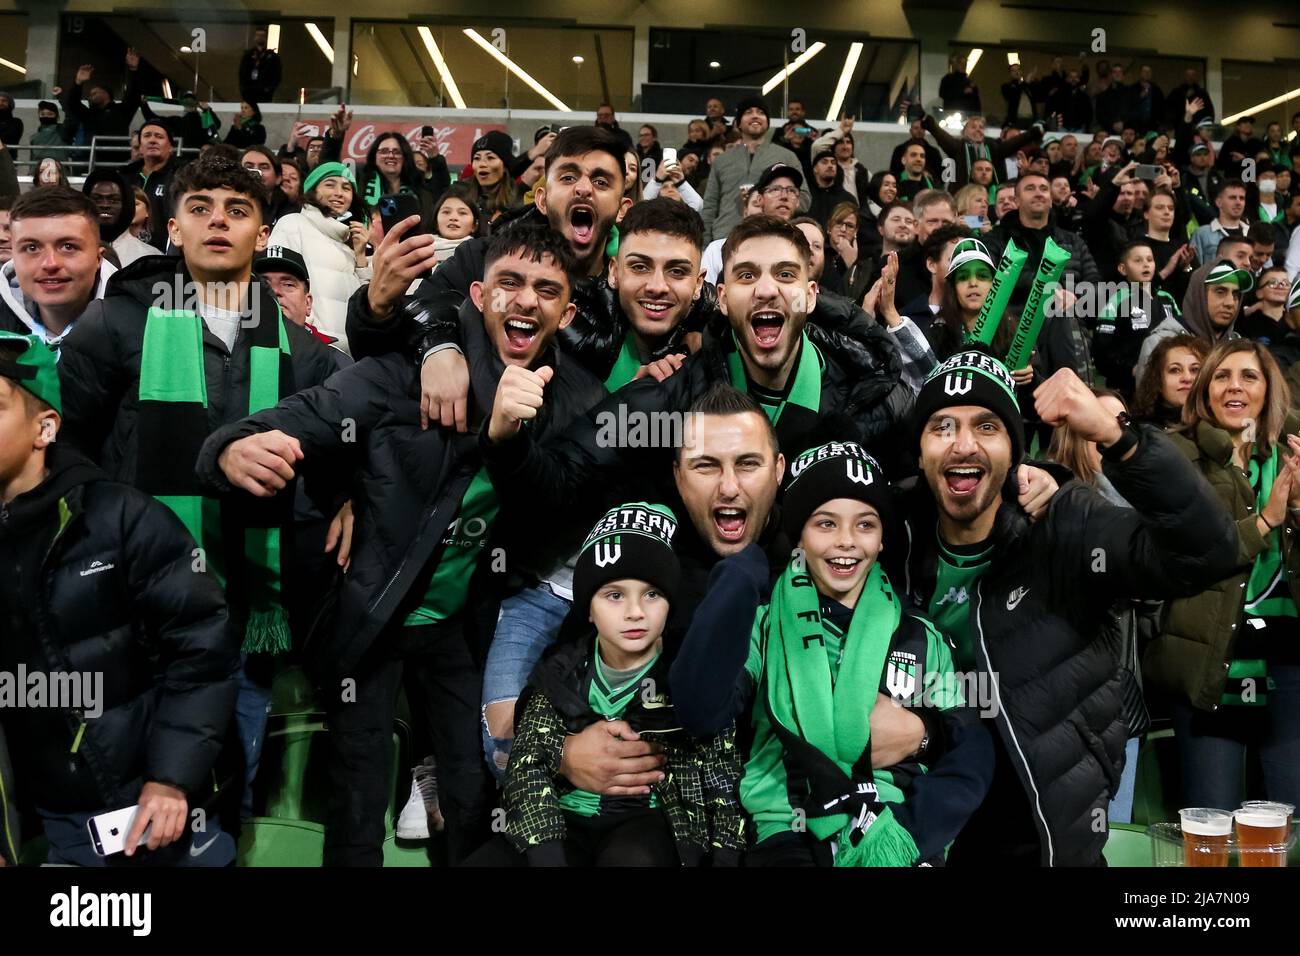 Melbourne, Australia, 28 May, 2022. Western United fans cheer during the A-League Grand Final soccer match between Melbourne City FC and Western United at AAMI Park on May 28, 2022 in Melbourne, Australia. Credit: Dave Hewison/Speed Media/Alamy Live News Stock Photo